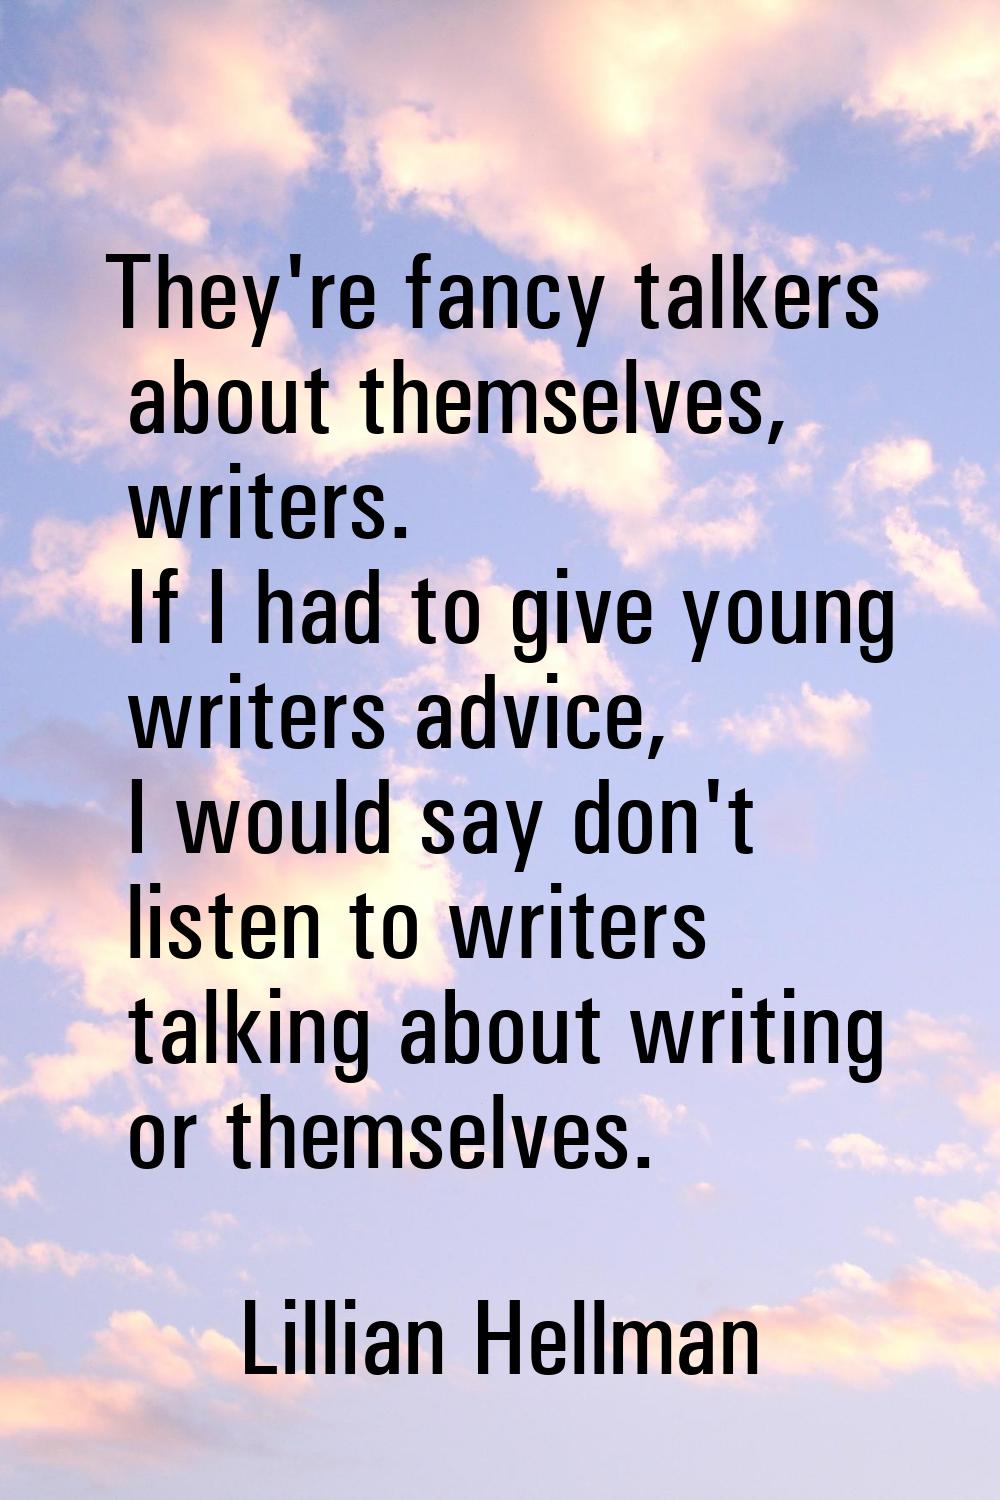 They're fancy talkers about themselves, writers. If I had to give young writers advice, I would say